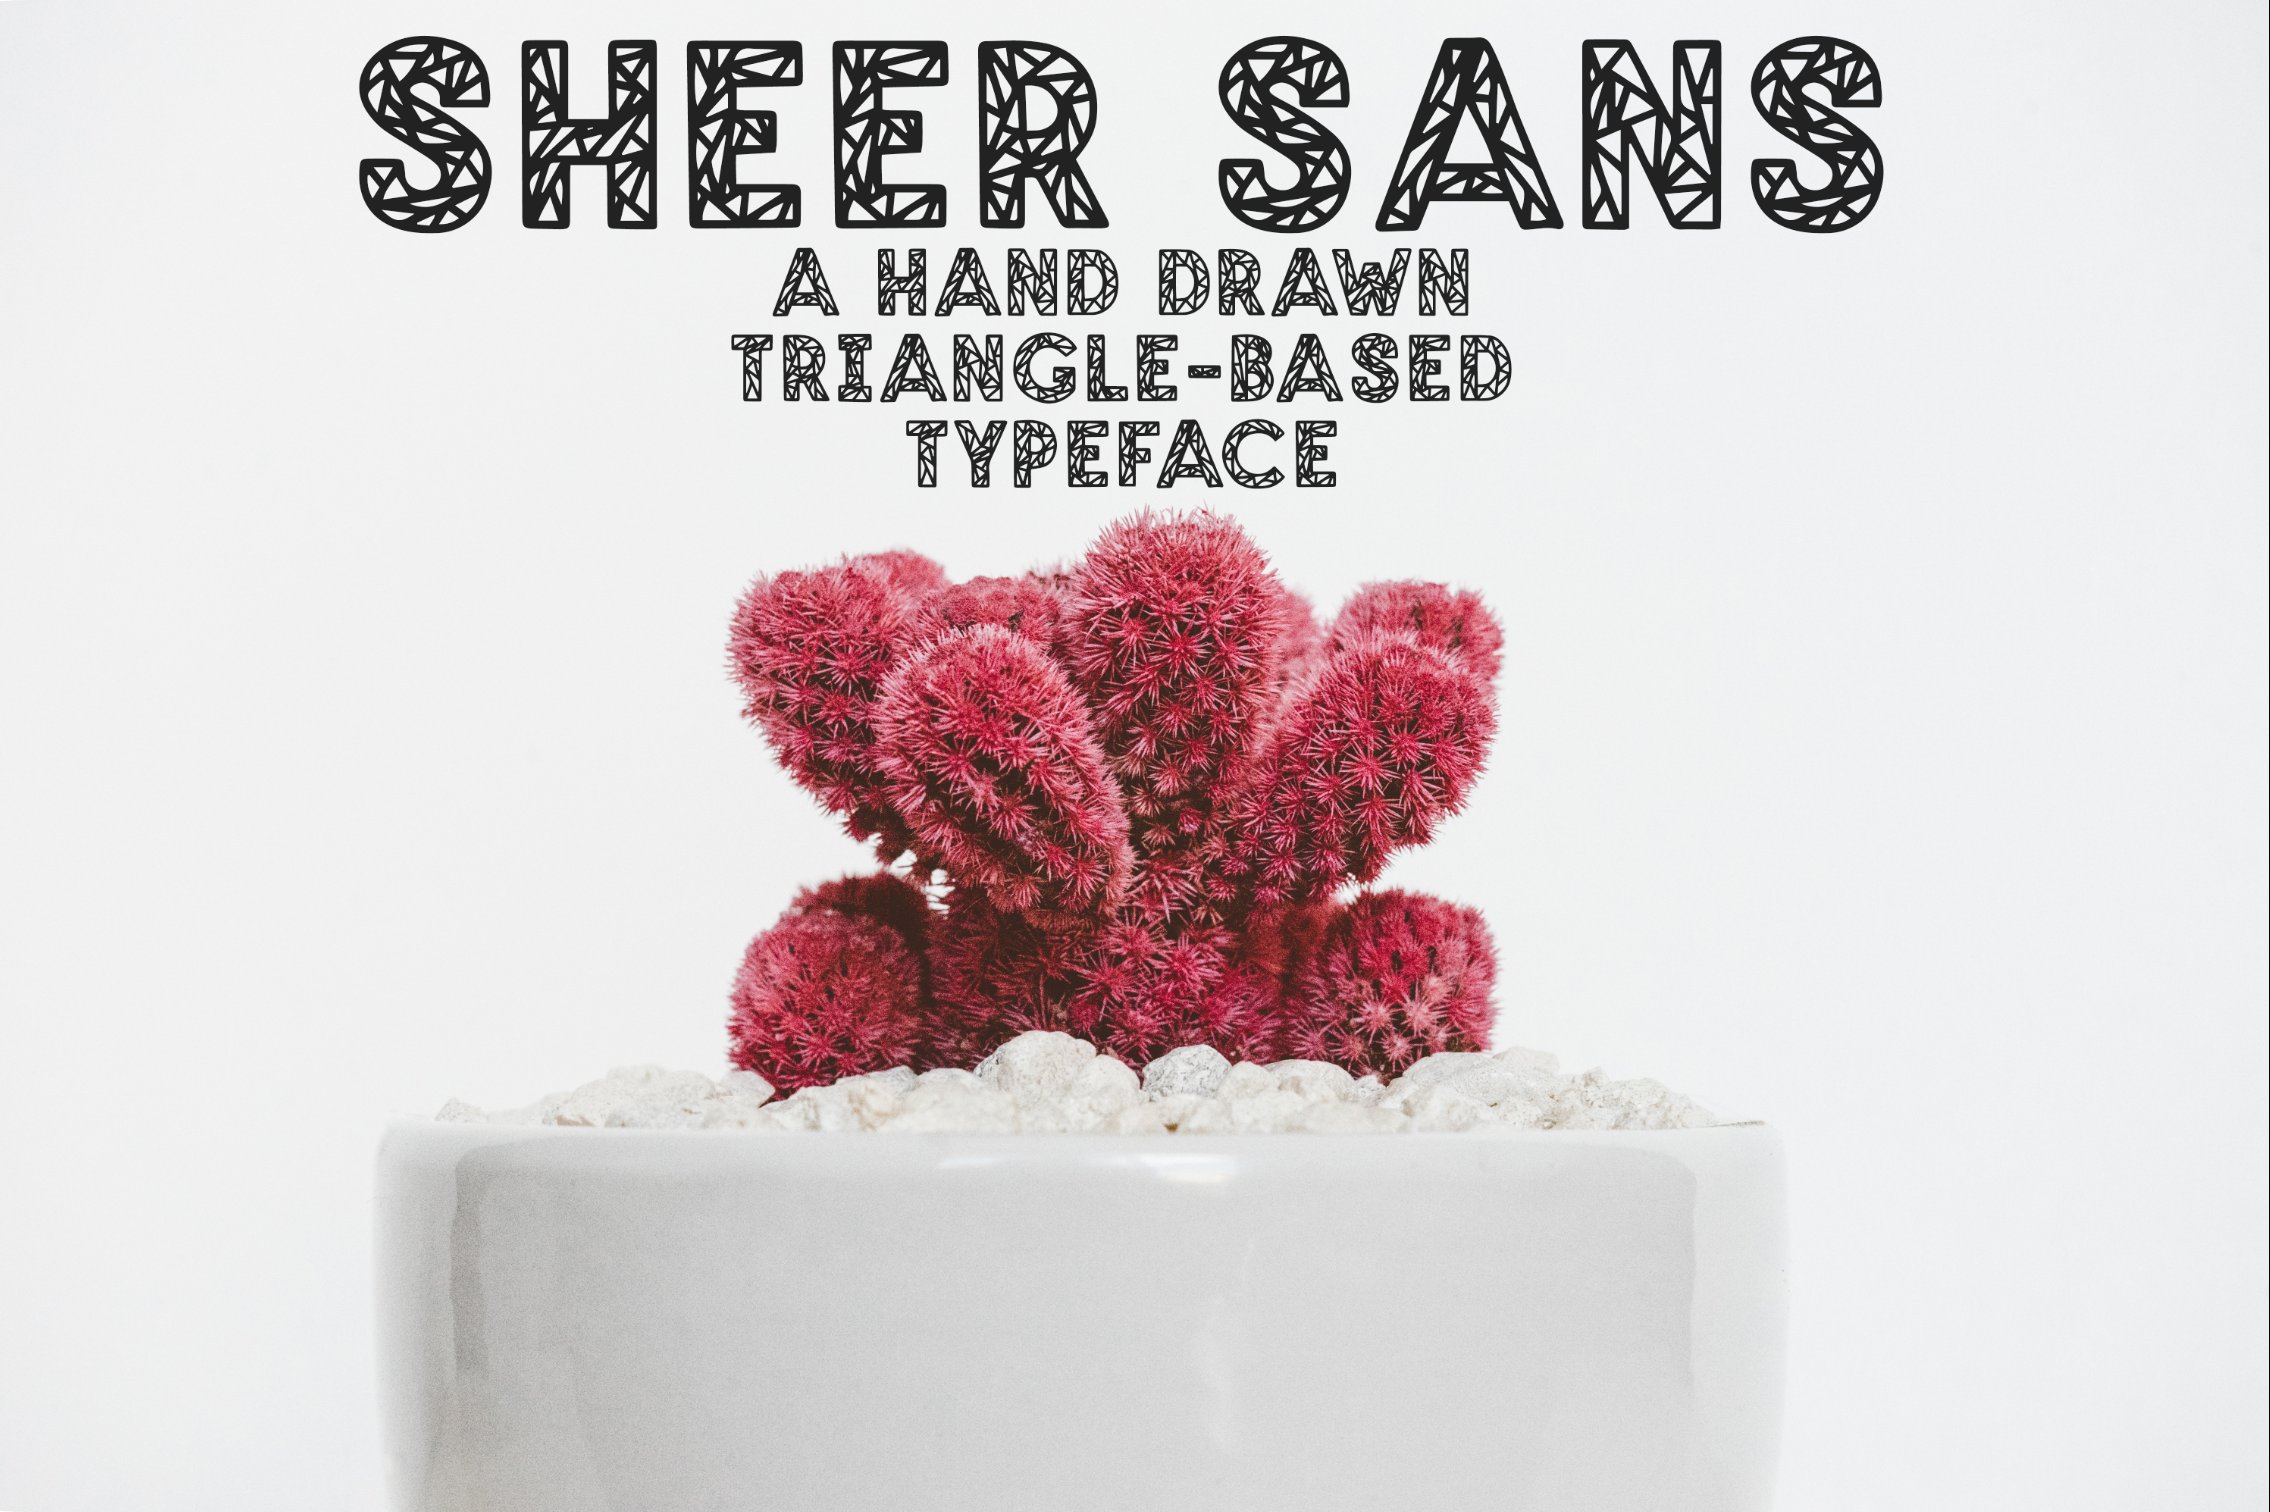 SHEER SANS Hand Drawn Typeface cover image.